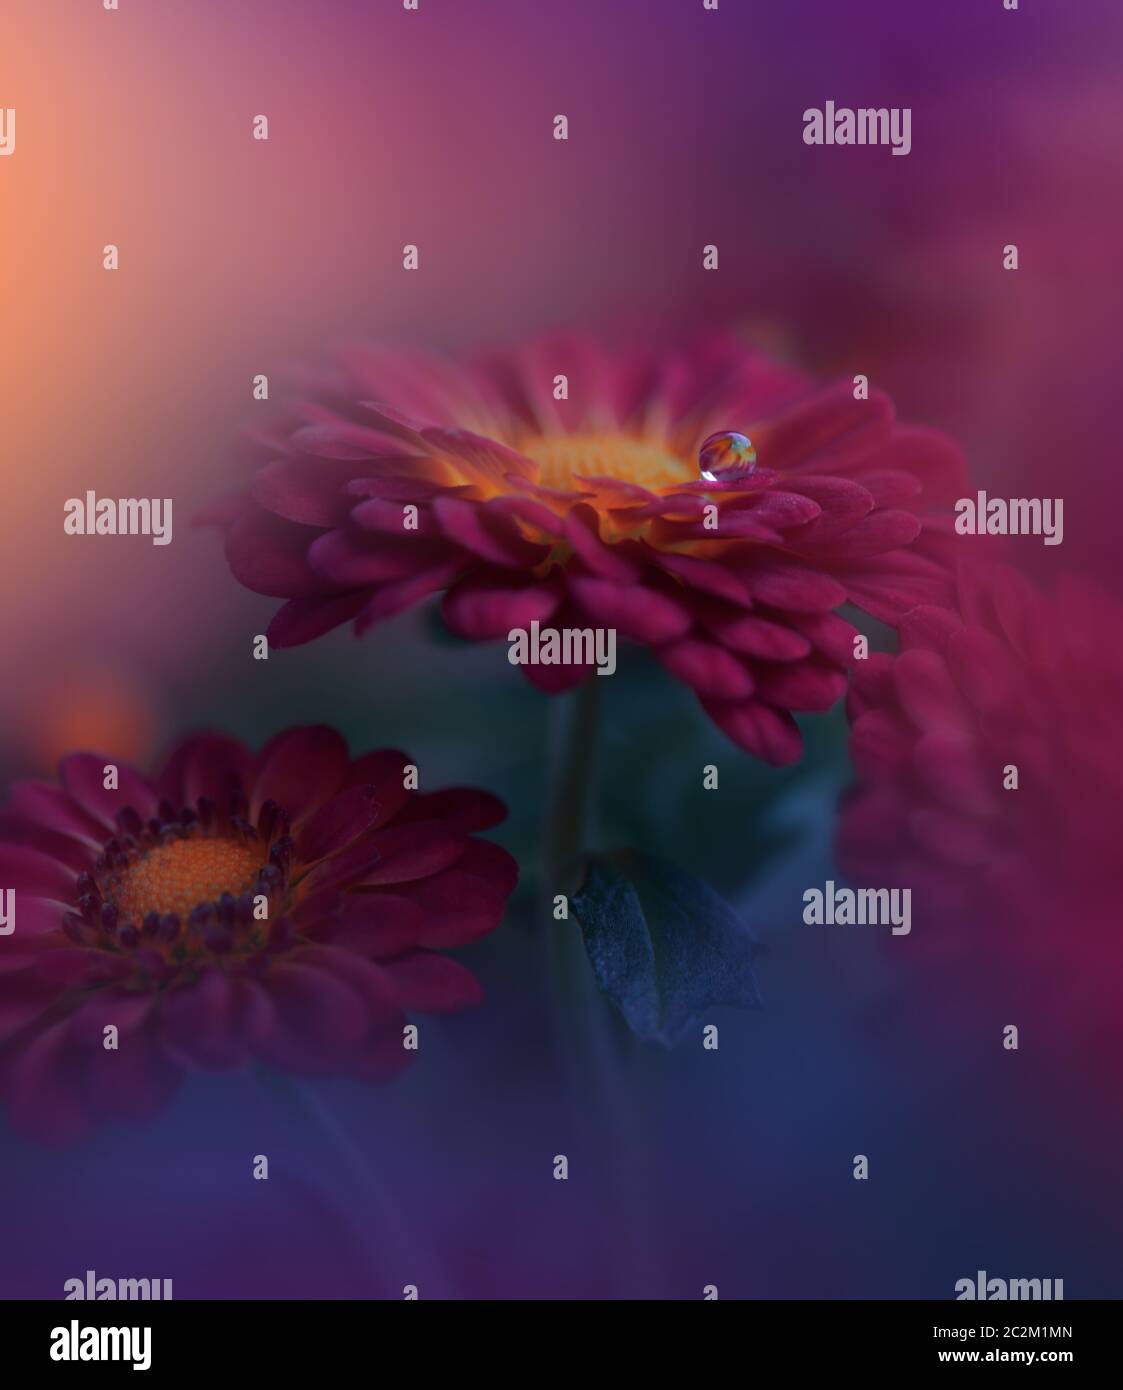 Bella natura background.Creative Wallpaper artistico.astratto Macro Fotografia.Soft Focus.Floral Art Design.Close up View.Happy Holidays.Celebration,Love.Violet Color.Colorful Chrysanthemum Flowers.Red Daisy Flower. Foto Stock